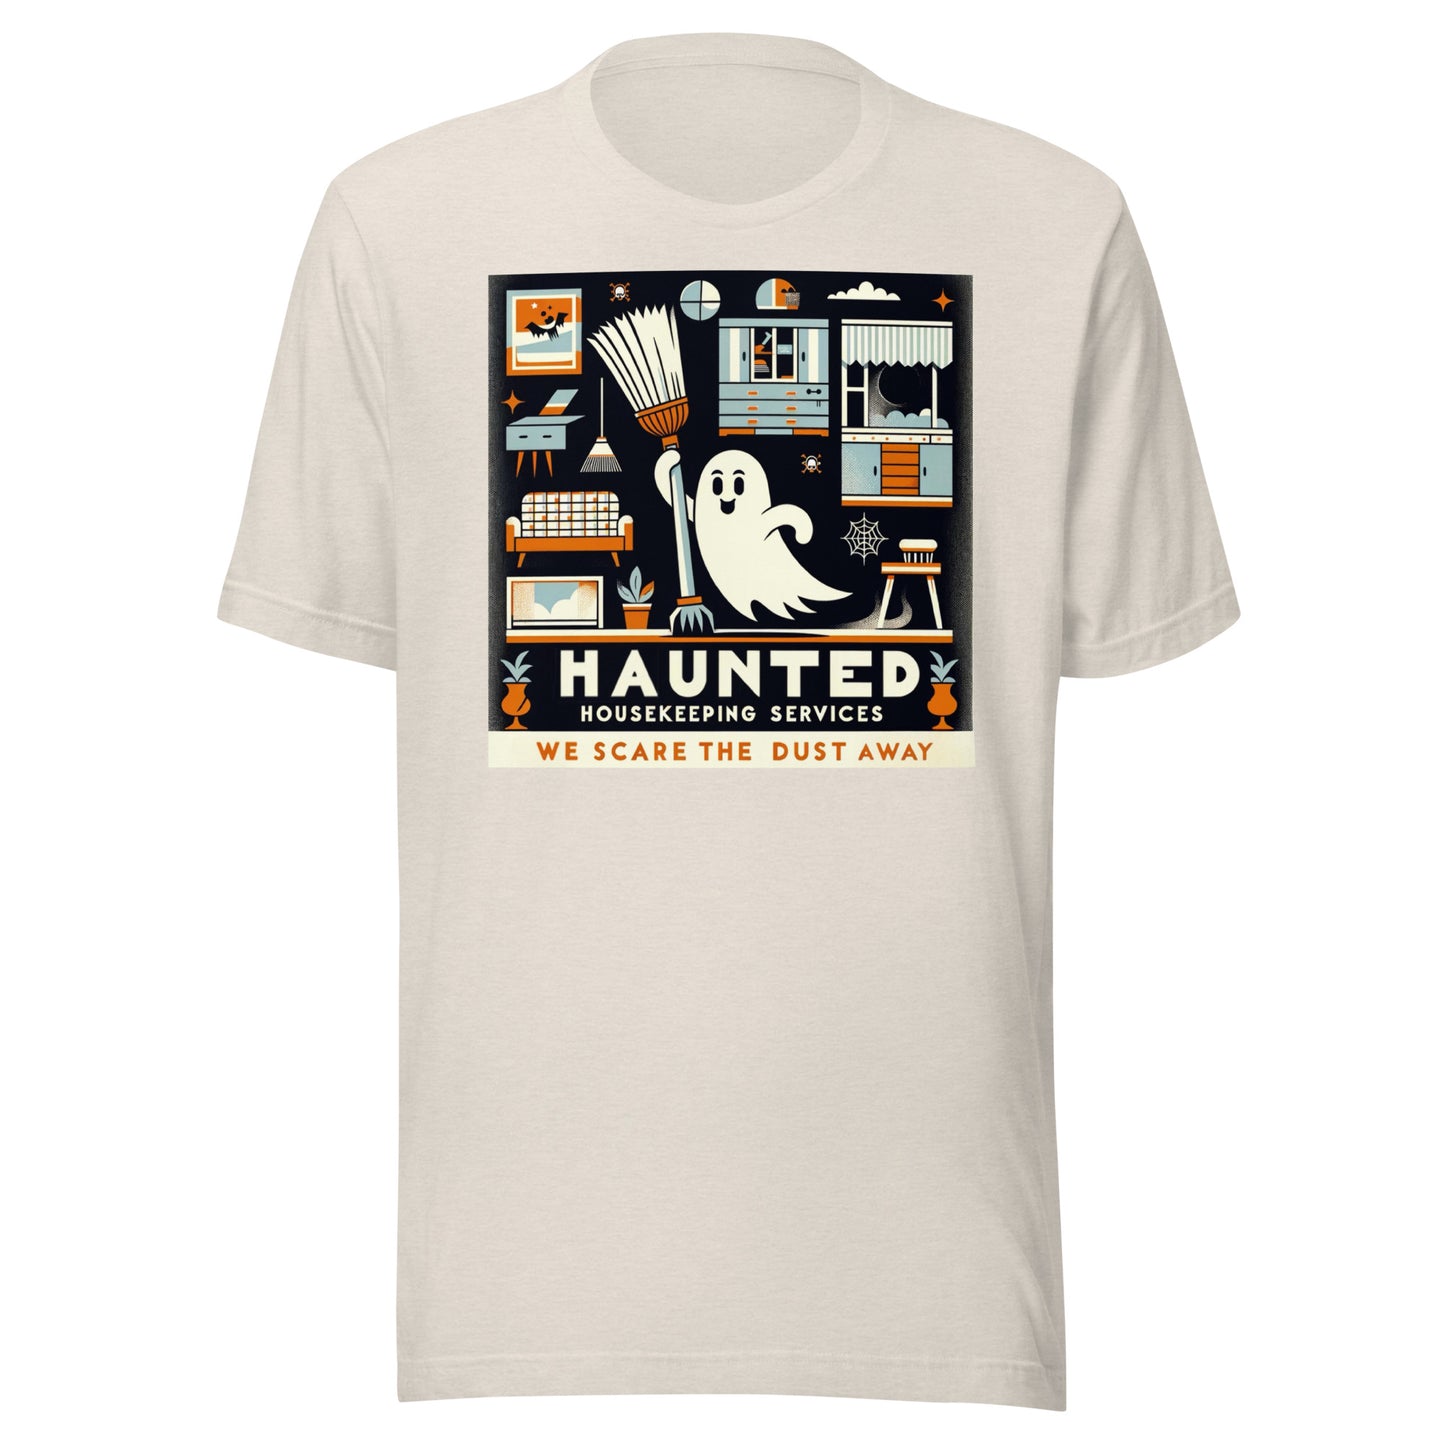 Haunted Housekeeping Services - We Scare the Dust Away Unisex t-shirt